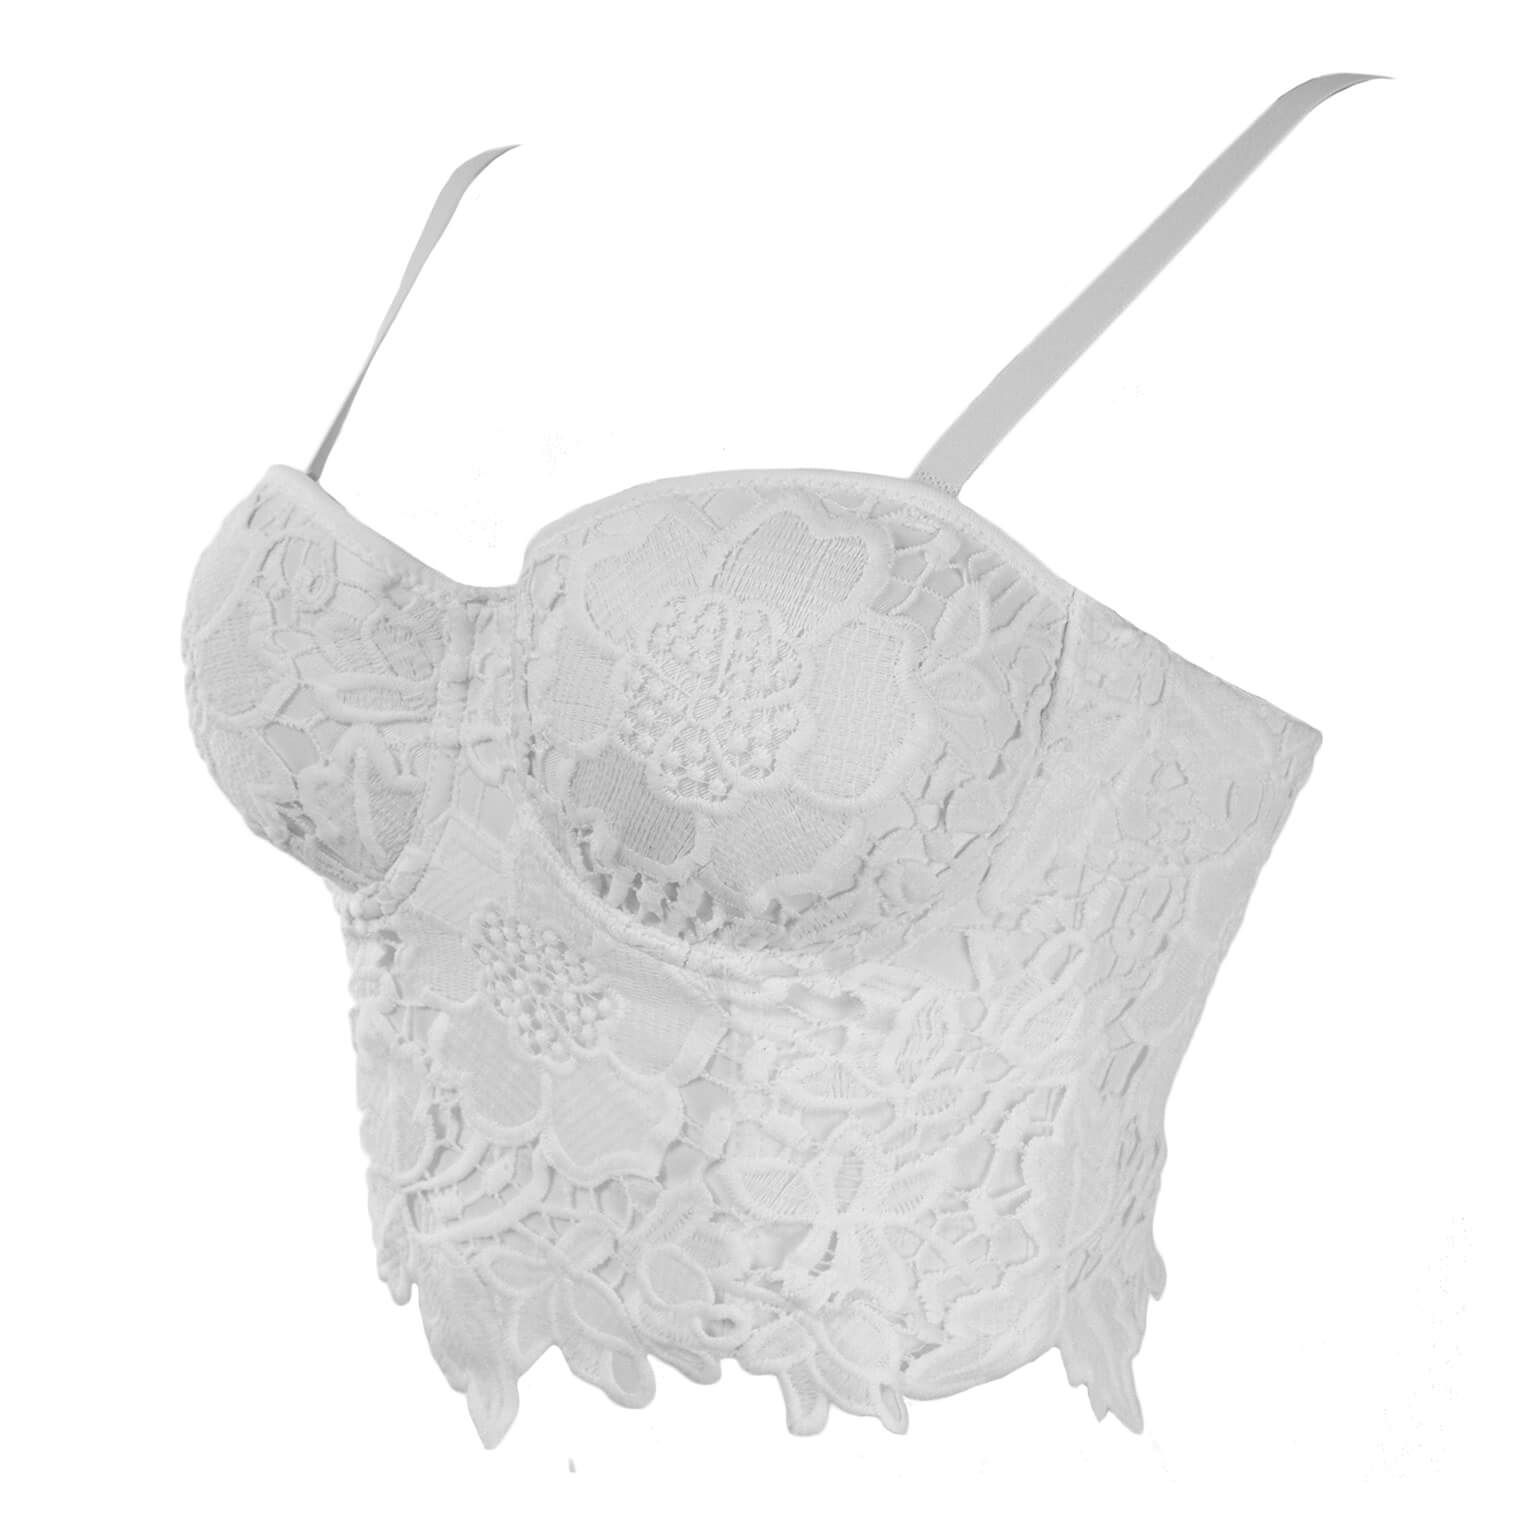 Embroidery Lace Bustier Corset Crop Top